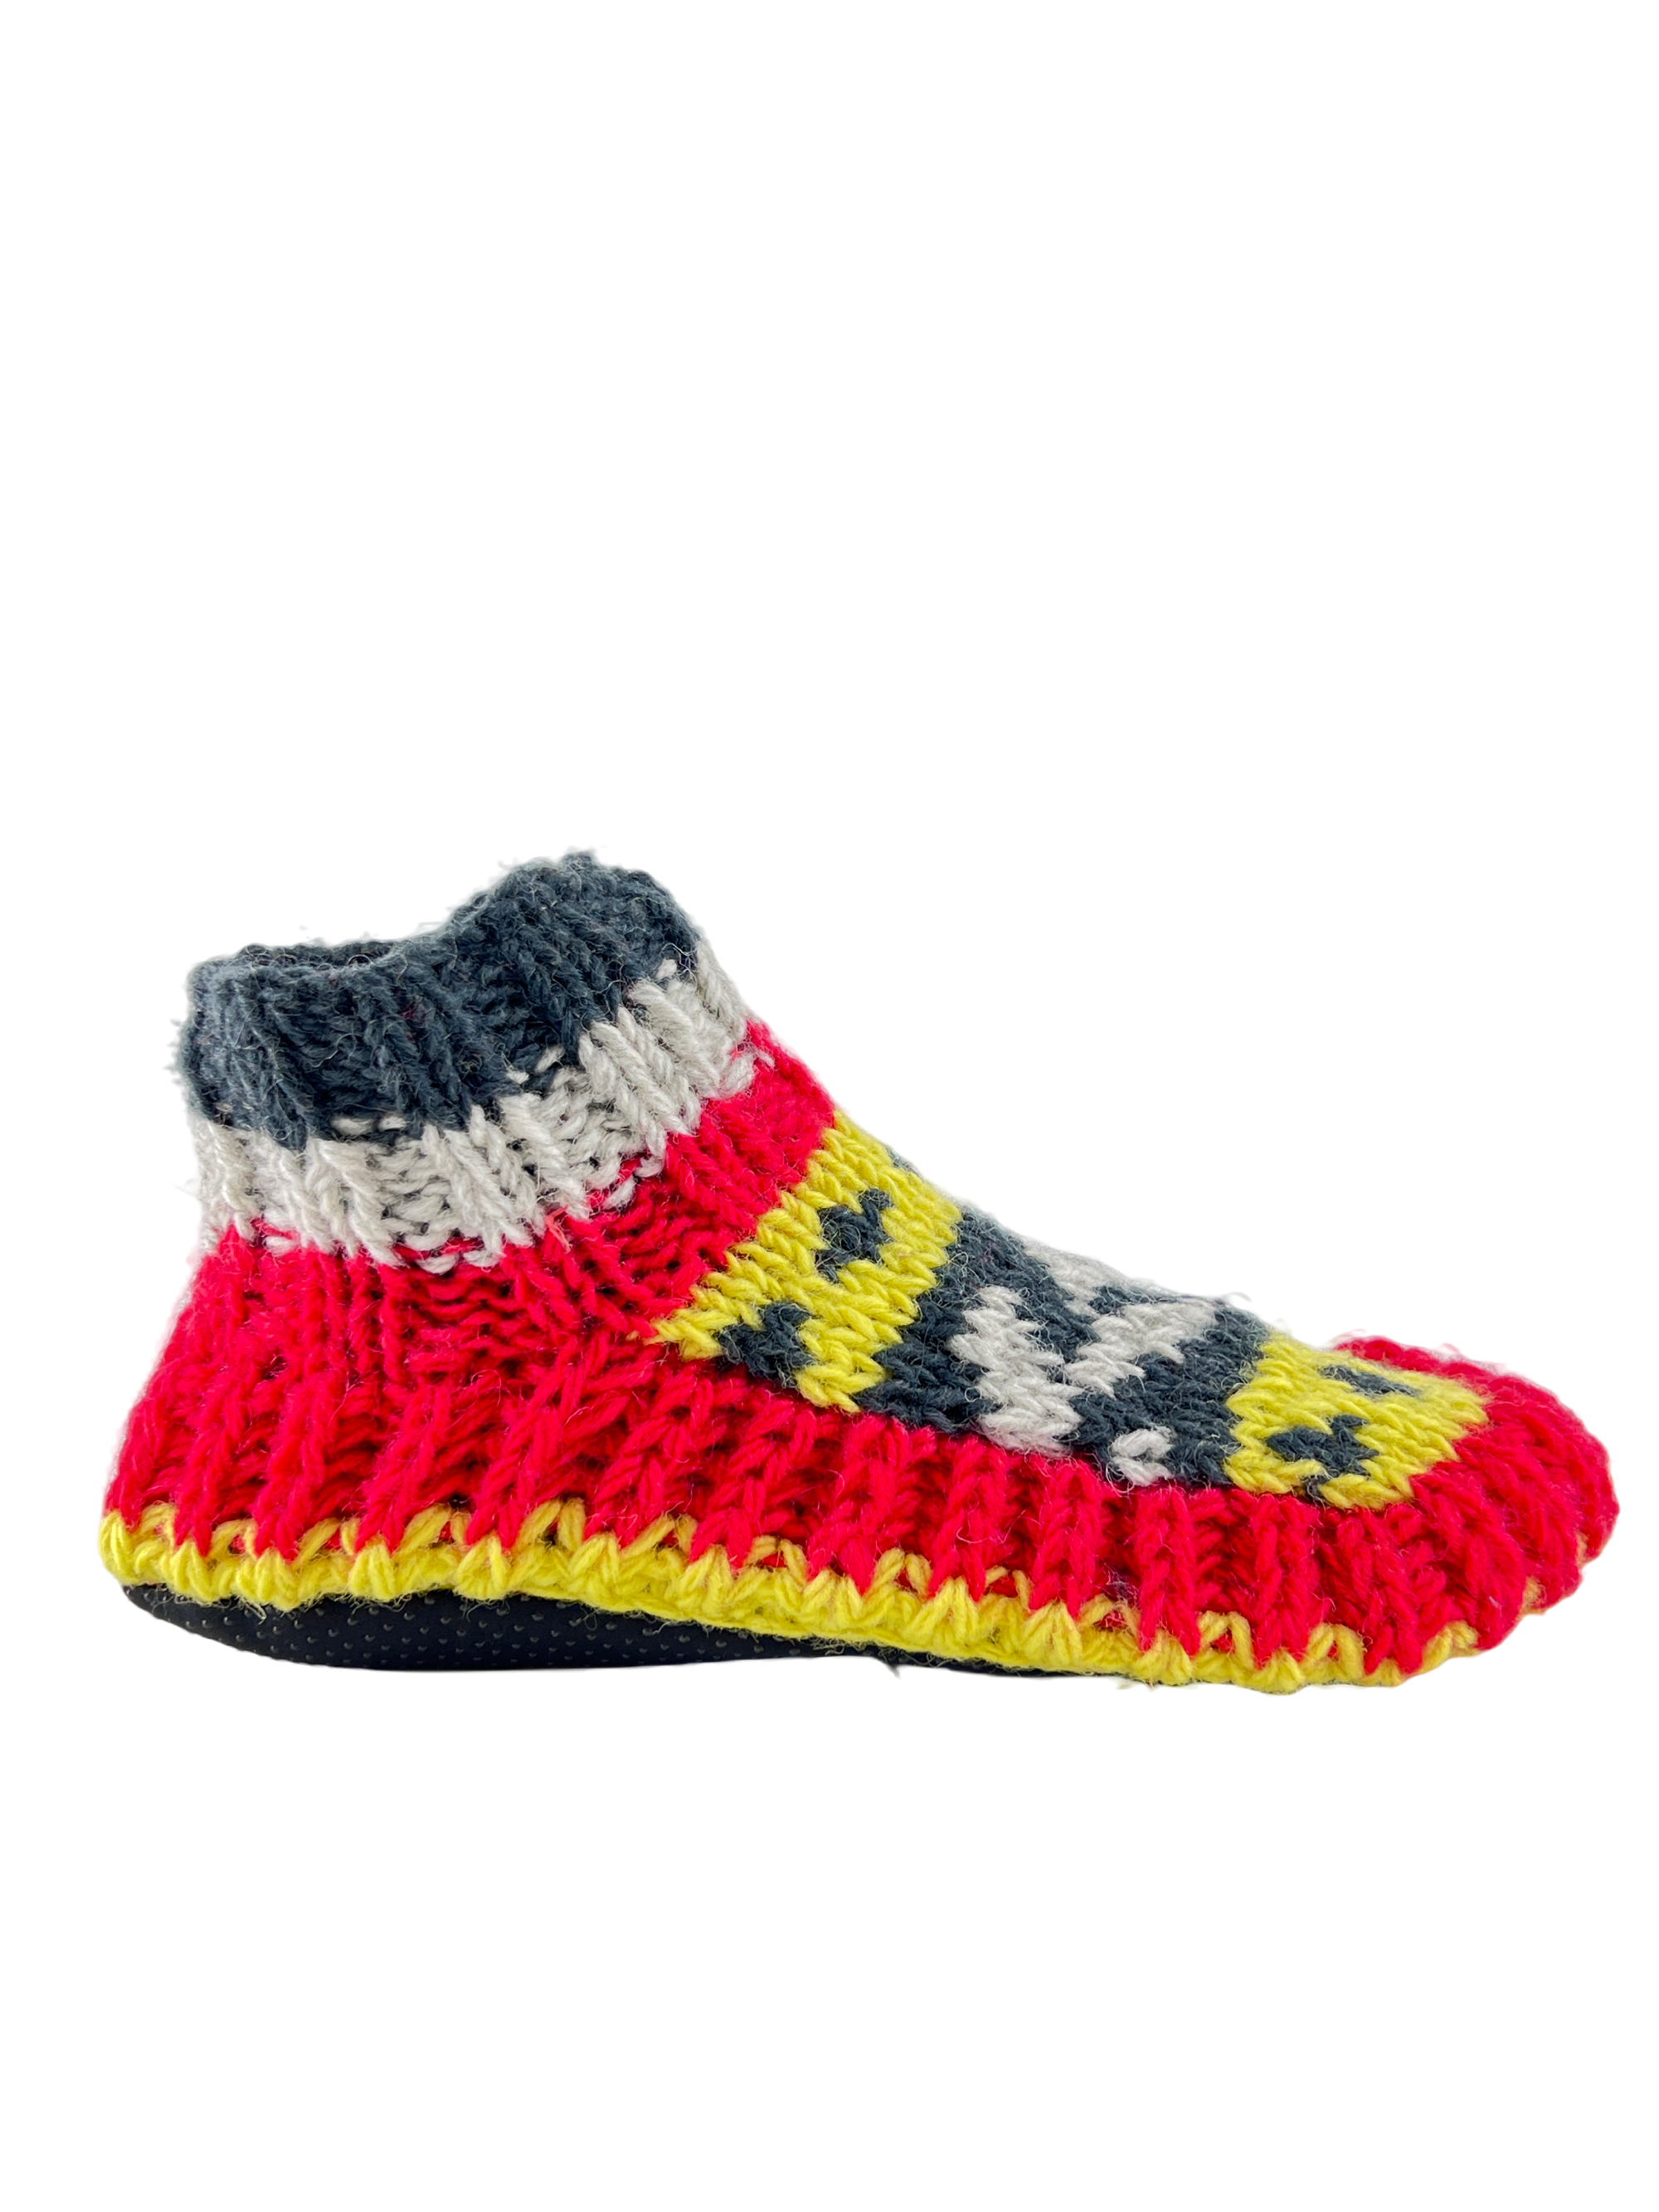 Cute socks Indoor Slippers Hand Knitted with Yak Wool | Anti-Skid Sole | Fuzzy Slippers Boots | Soft Woolen House Slippers for Men & Women